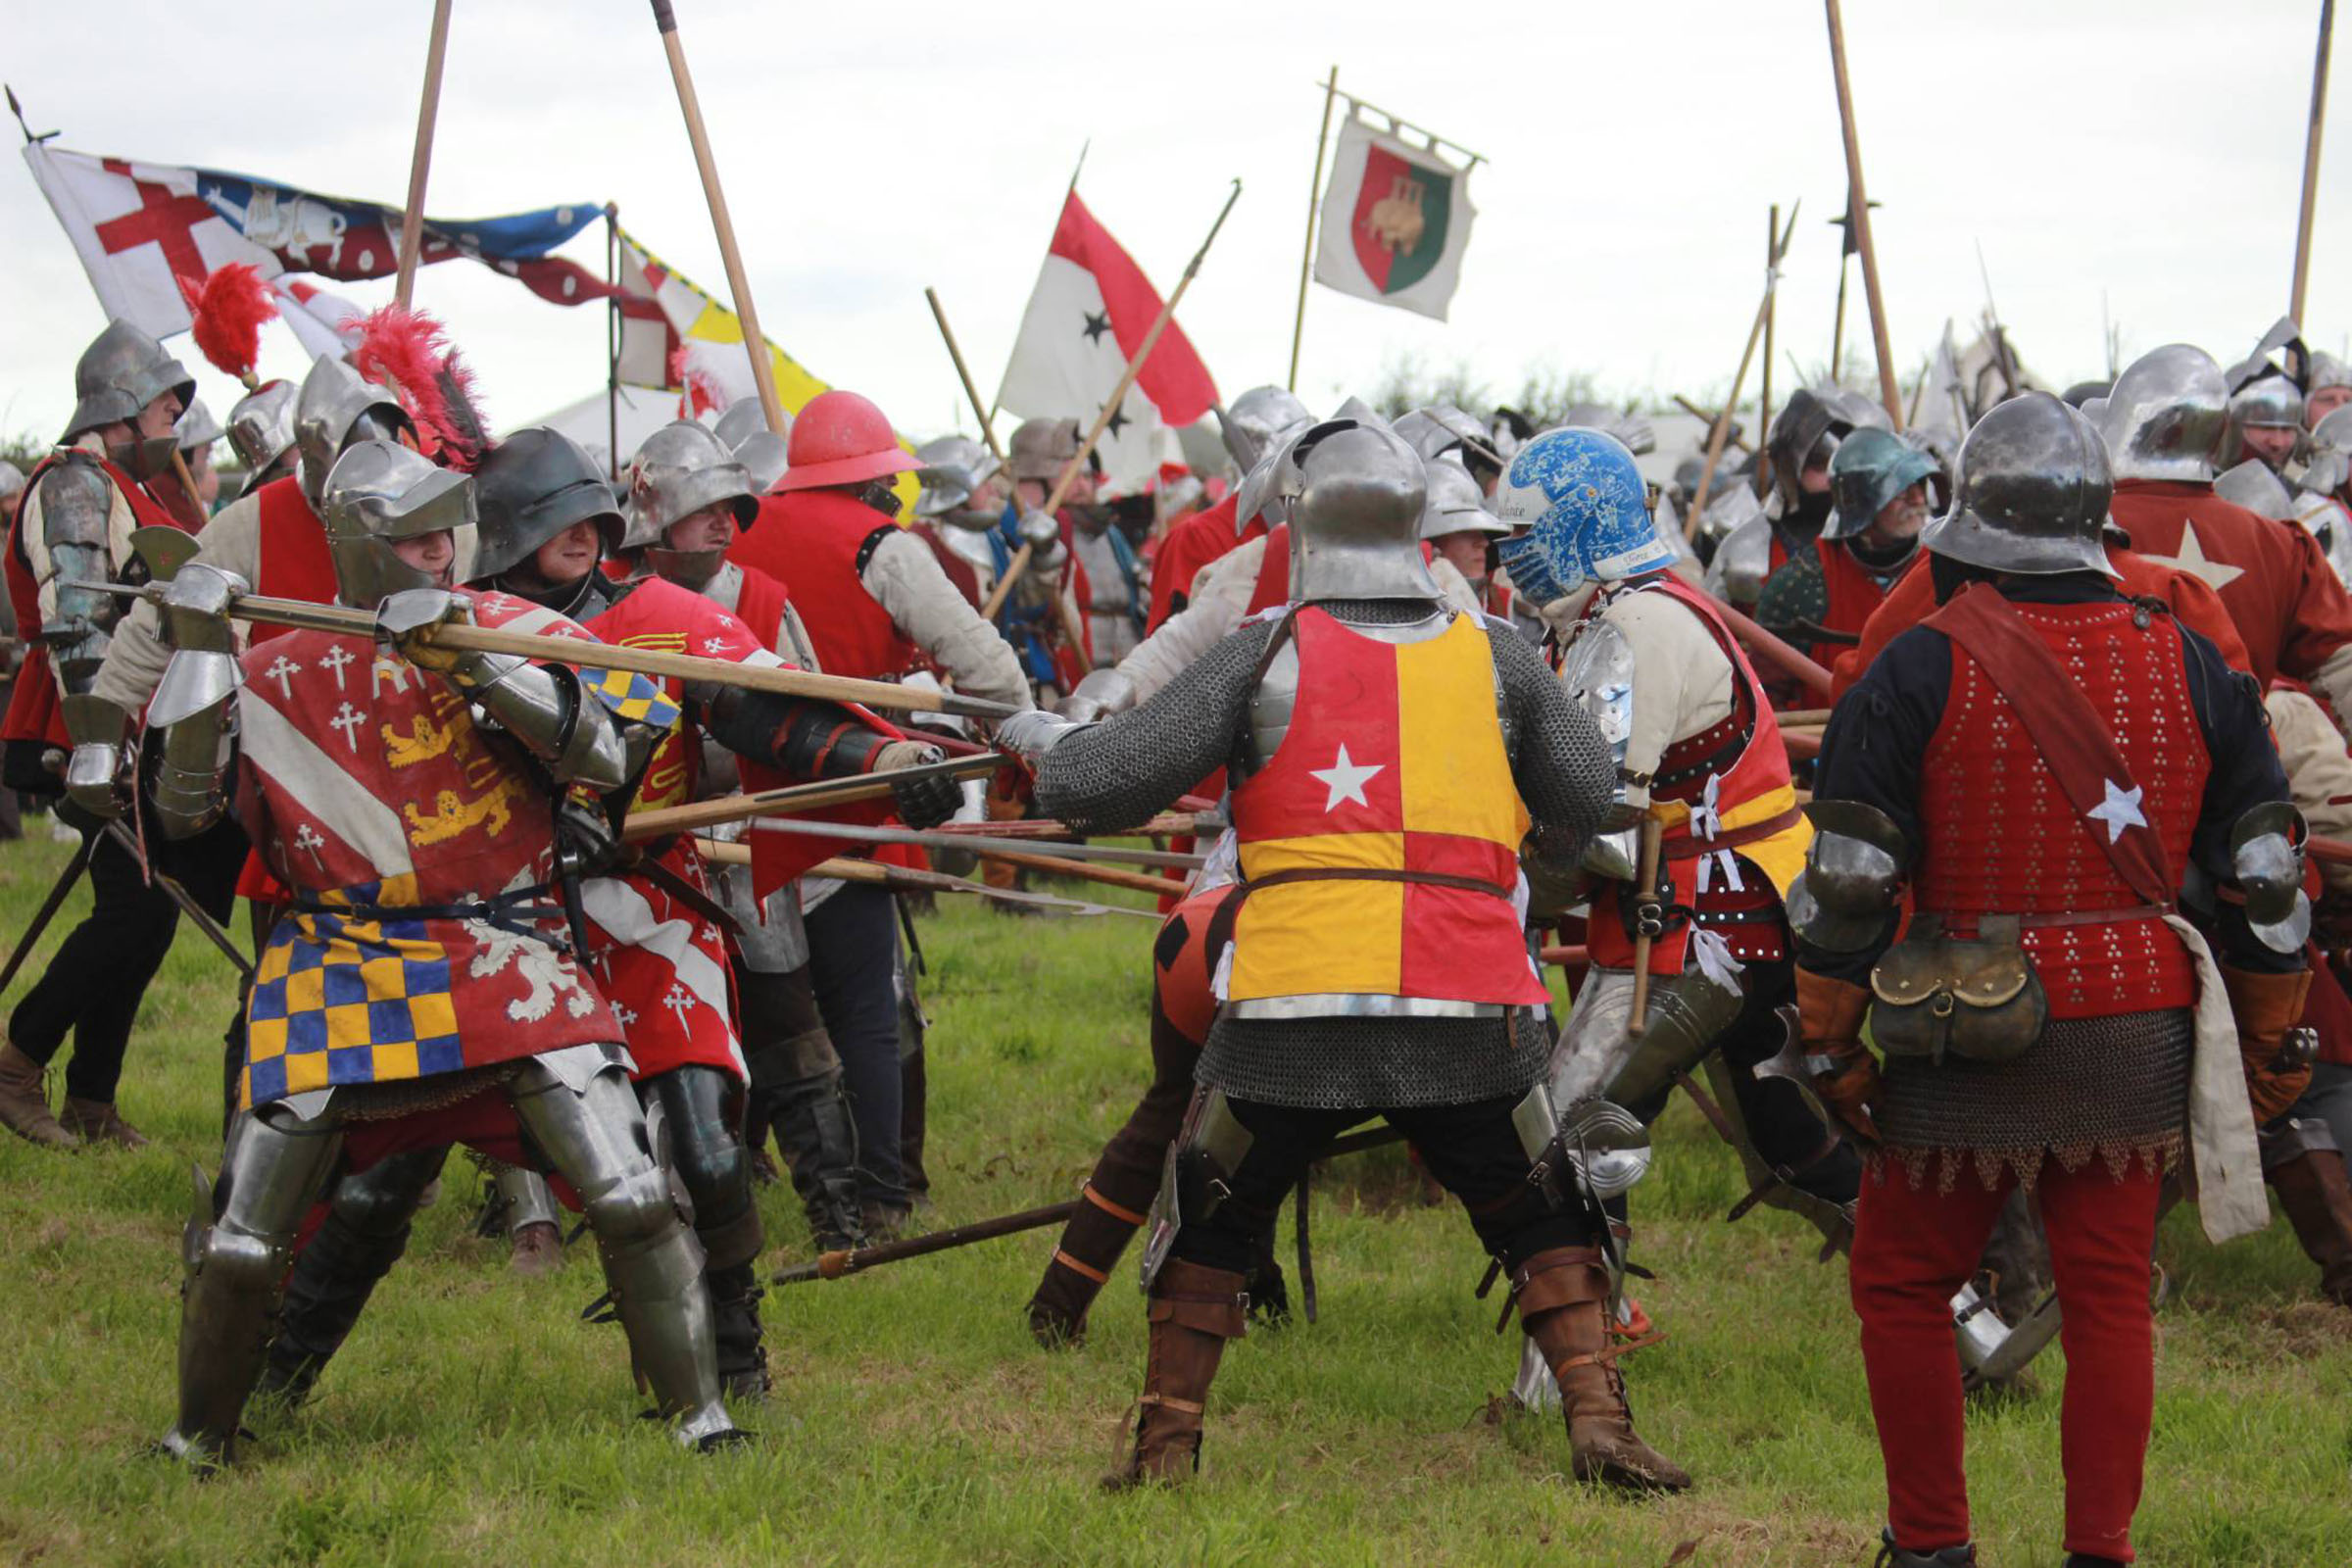 Surrey Fighting Oxfords Army In The Battle Of The Vanguards Aspect Ratio 640 340